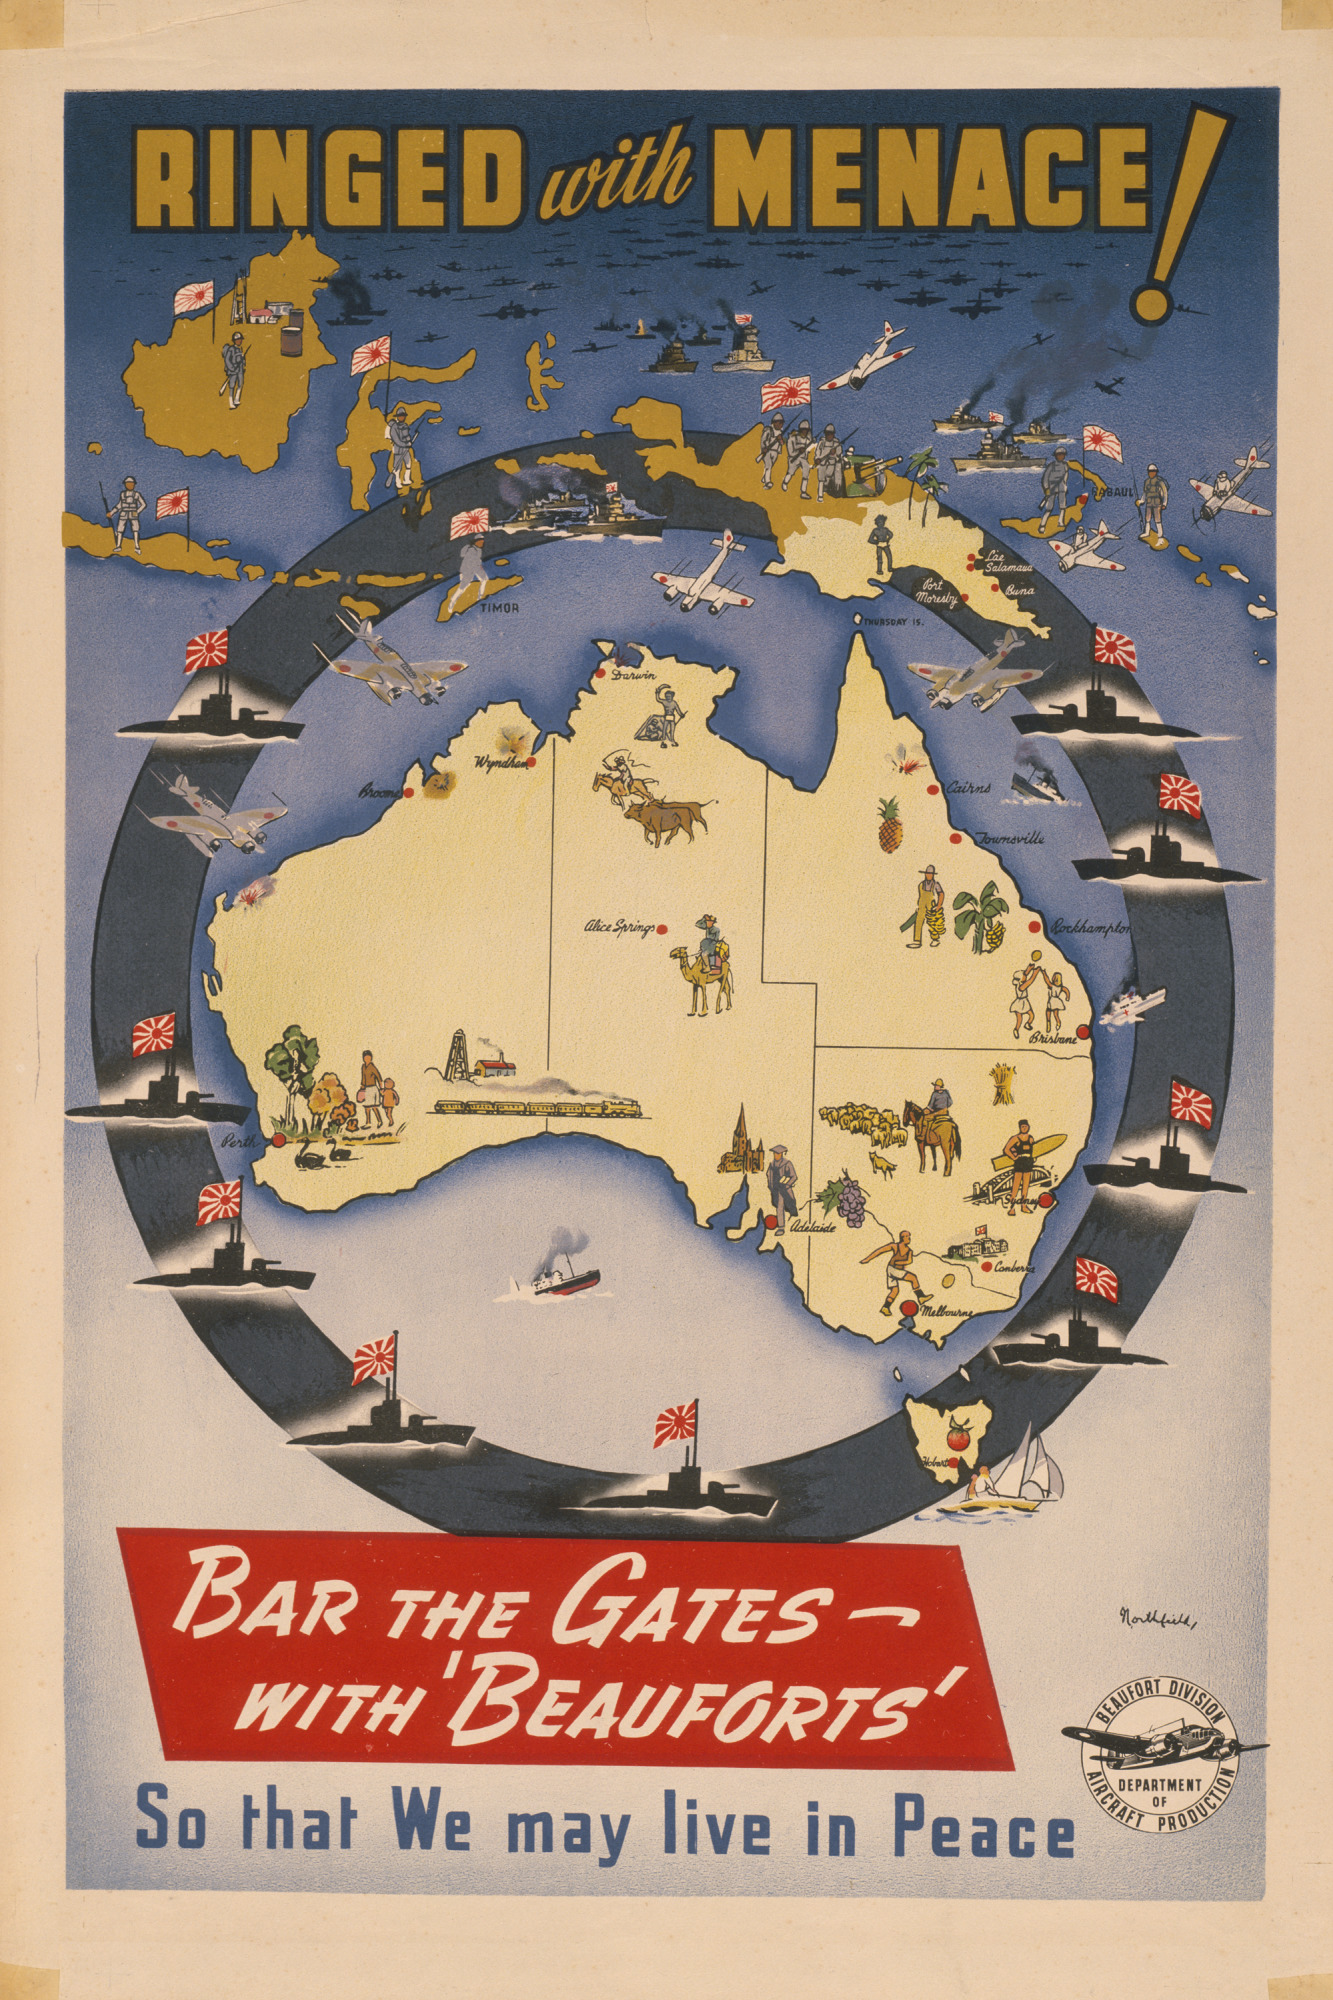 ‘Ringed with menace’ poster, Second World War | Australia’s Defining